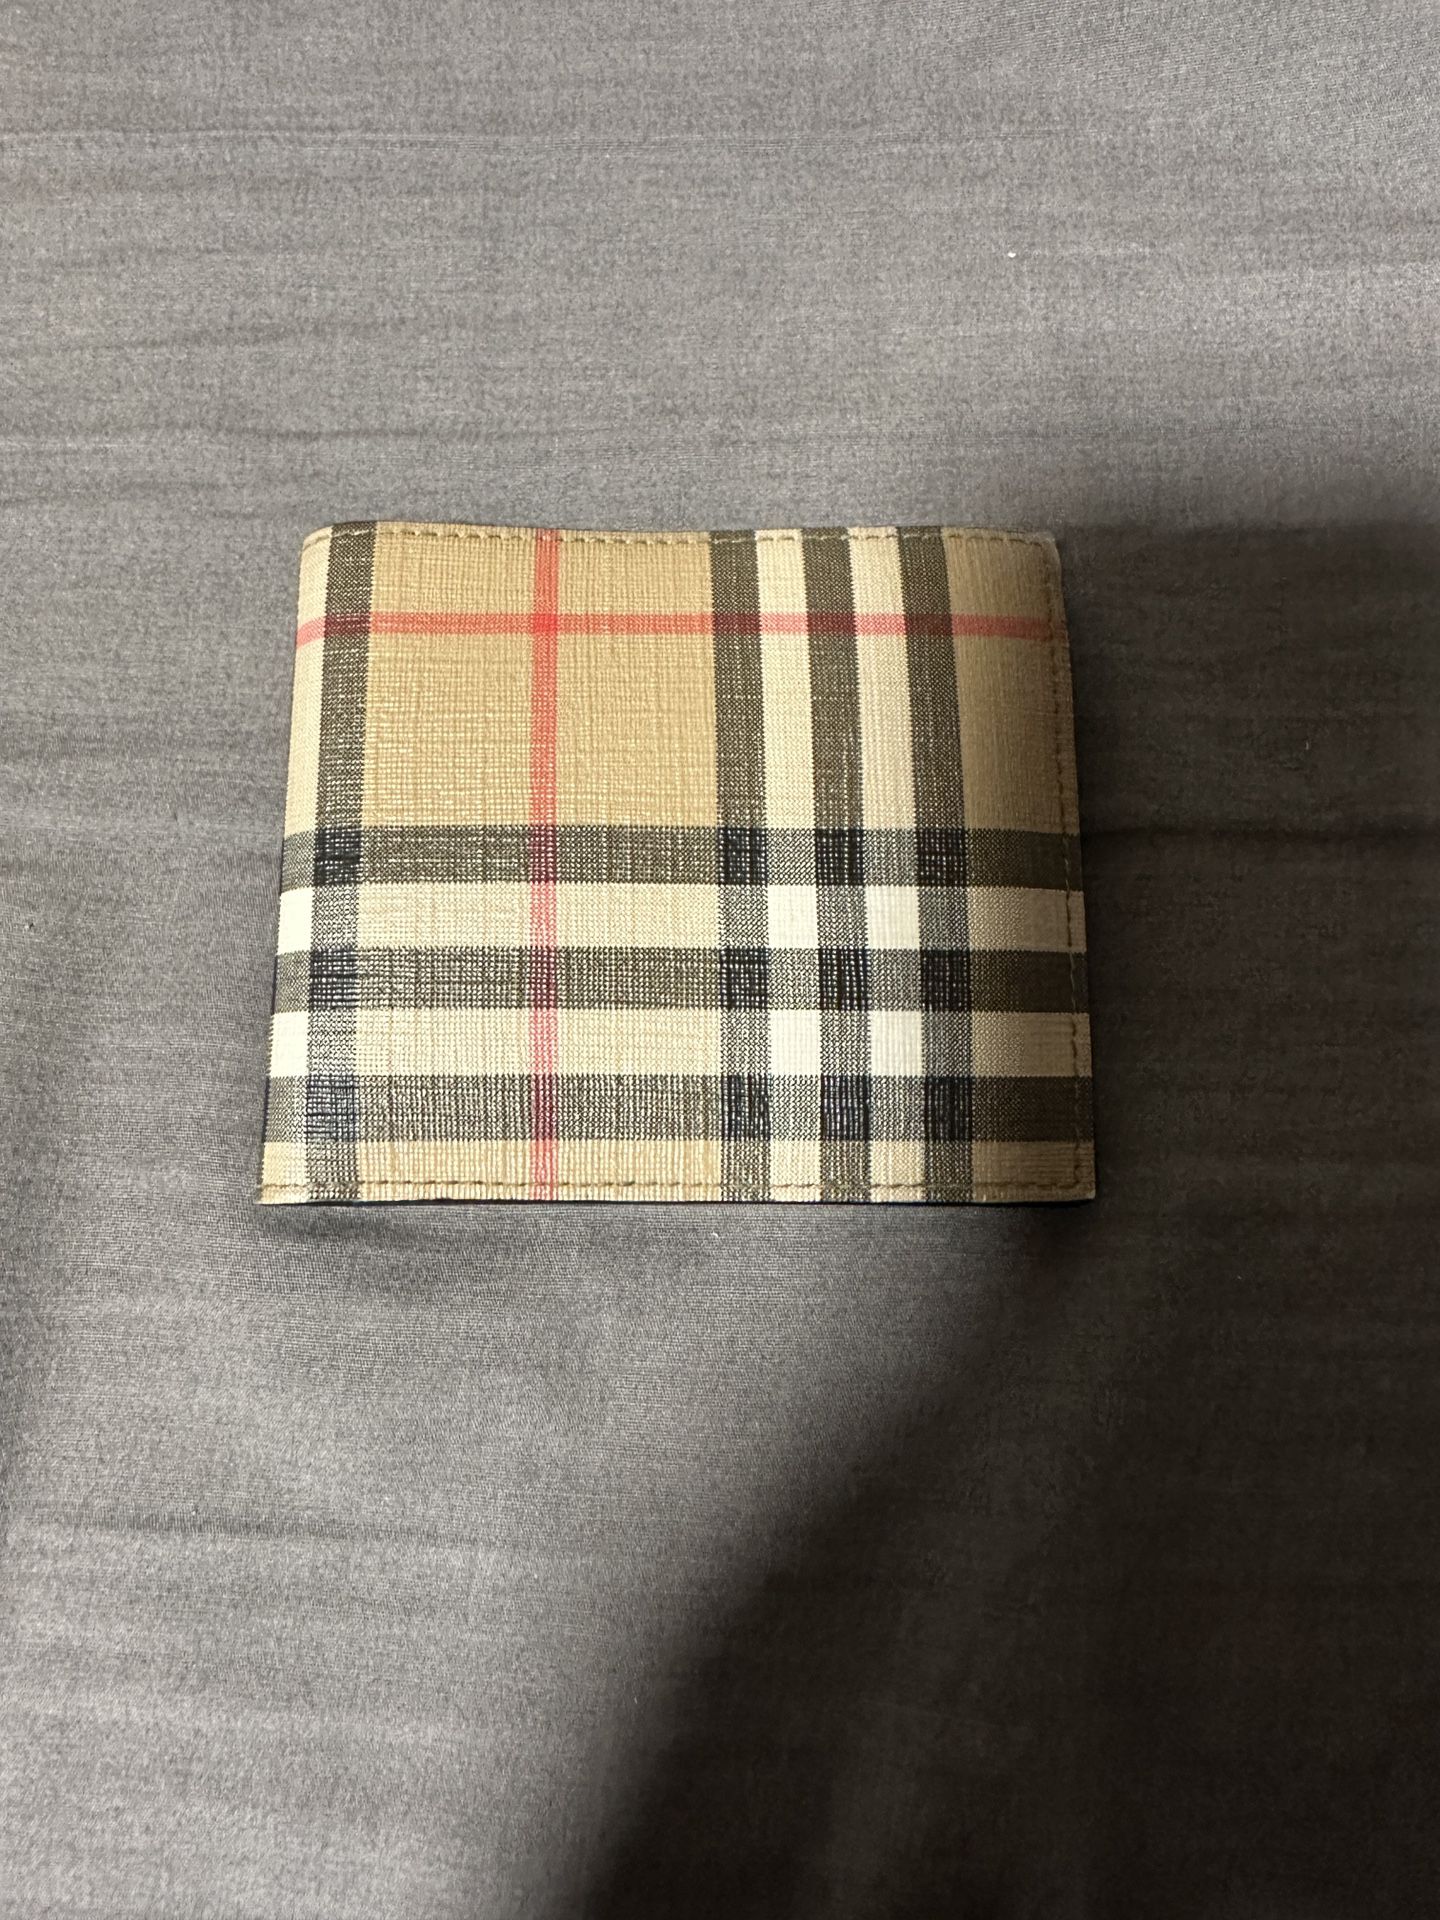 Authentic BURBERRY wallet for Sale in Stockton, CA - OfferUp